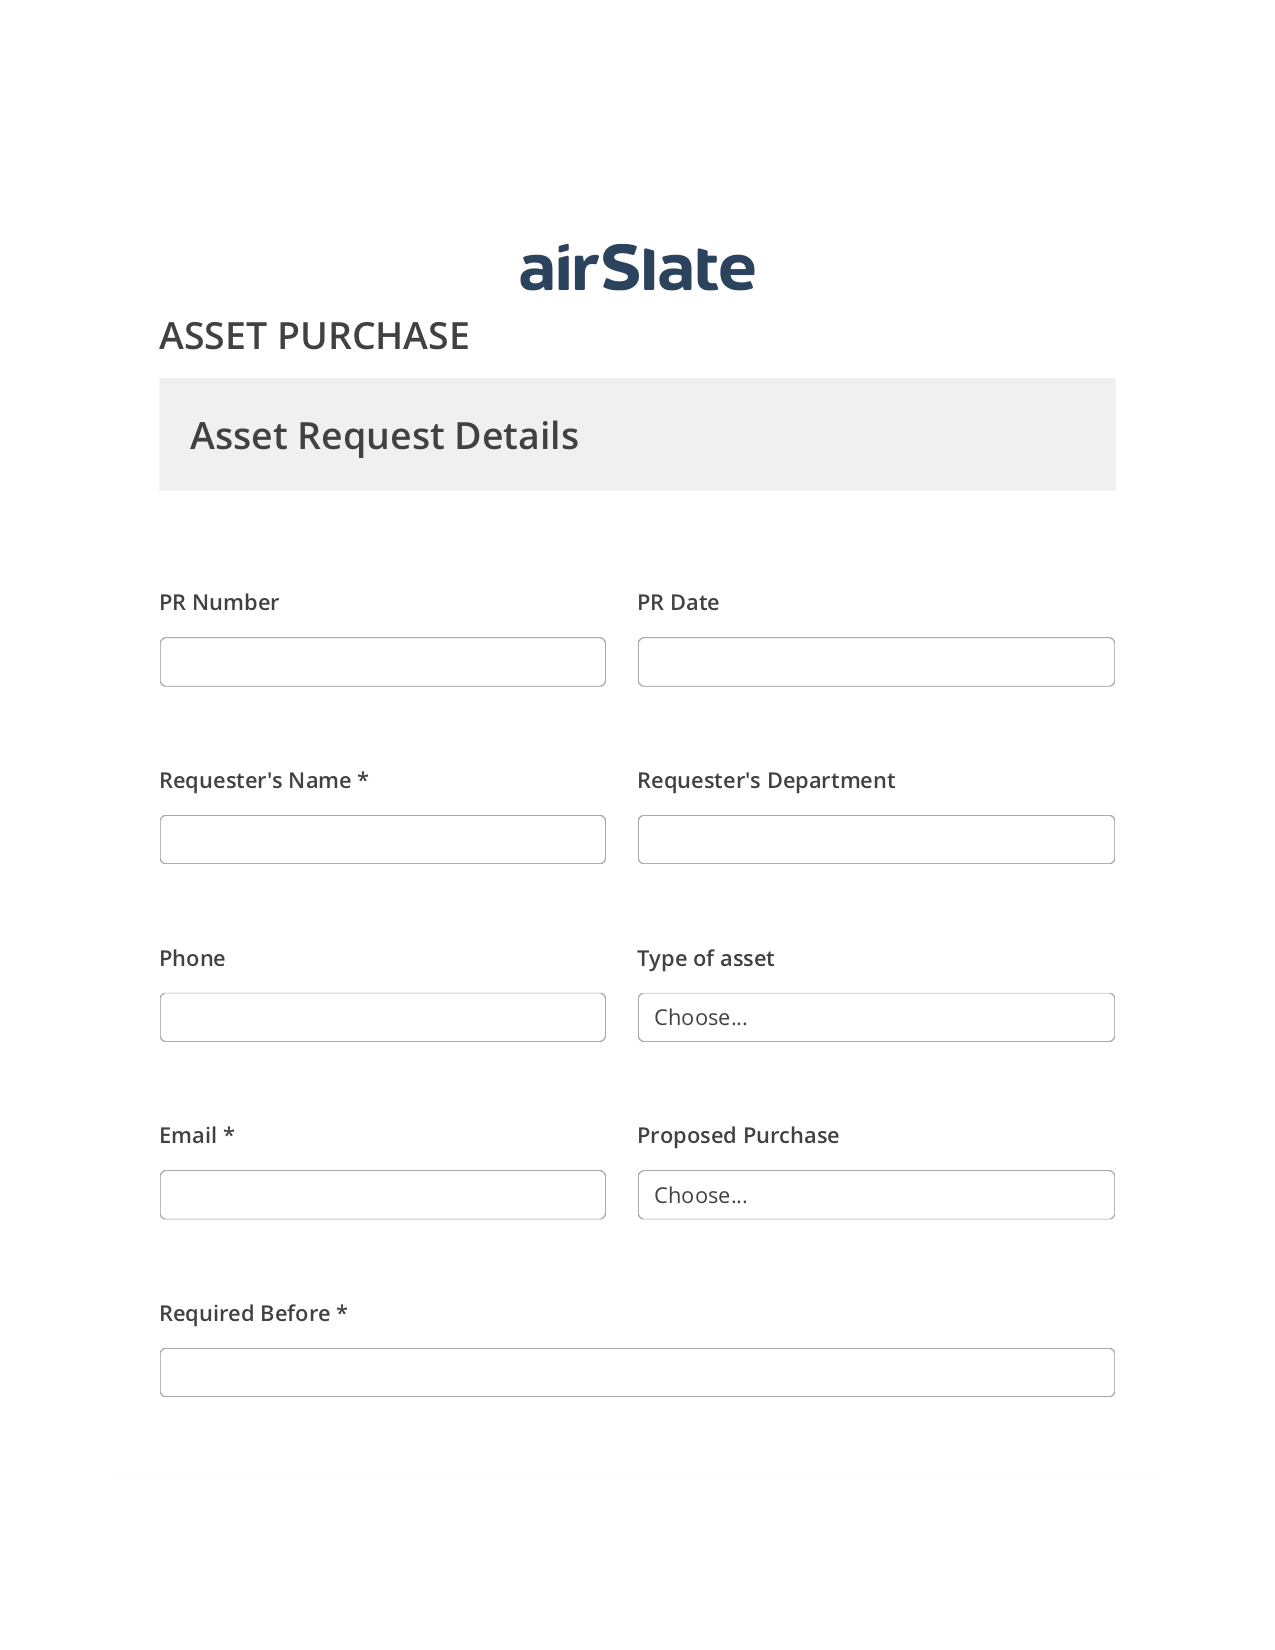 Asset Purchase Flow Pre-fill from NetSuite Records Bot